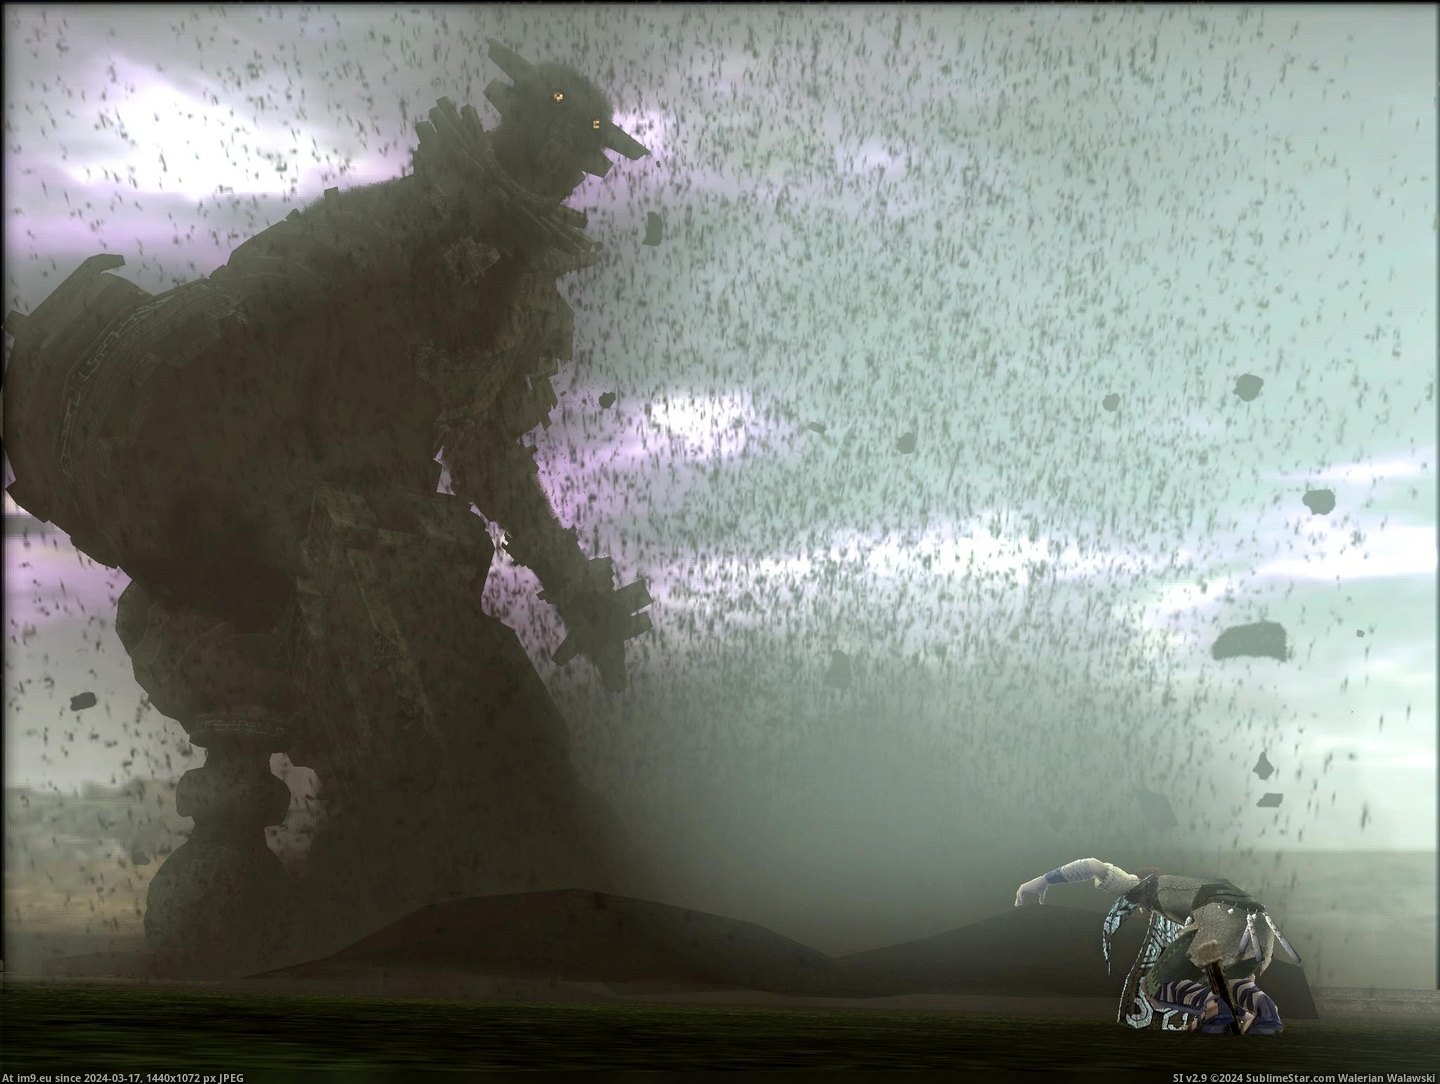 #Game #Shadow #Colossus #Video Video Game Shadow Of The Colossus 46849 Pic. (Изображение из альбом Games Wallpapers))